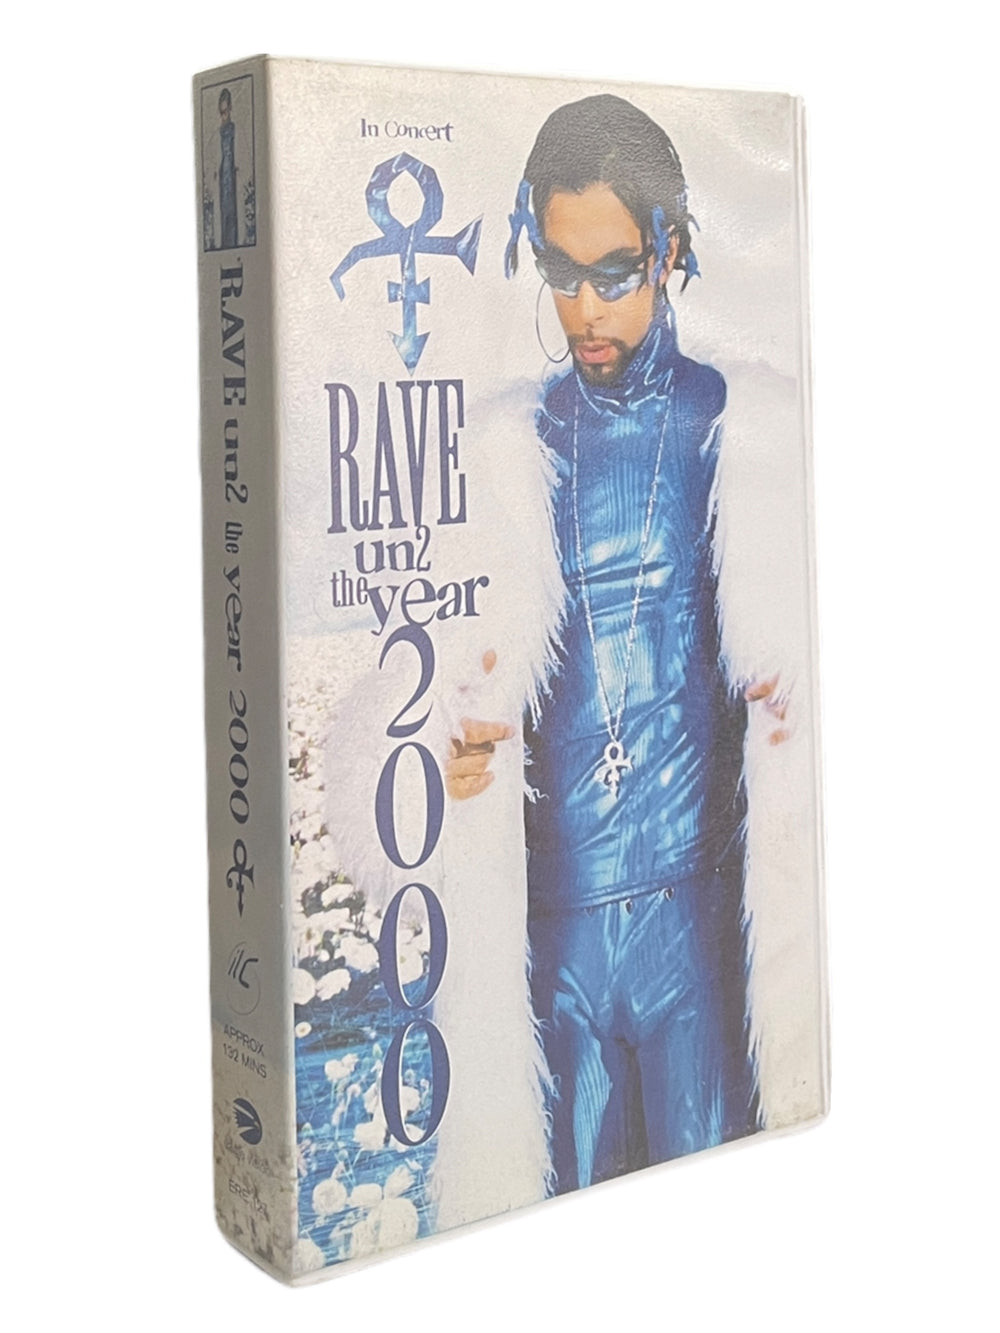 Prince – O(+>Rave Un2 The Year 2000 VHS Video Cassette